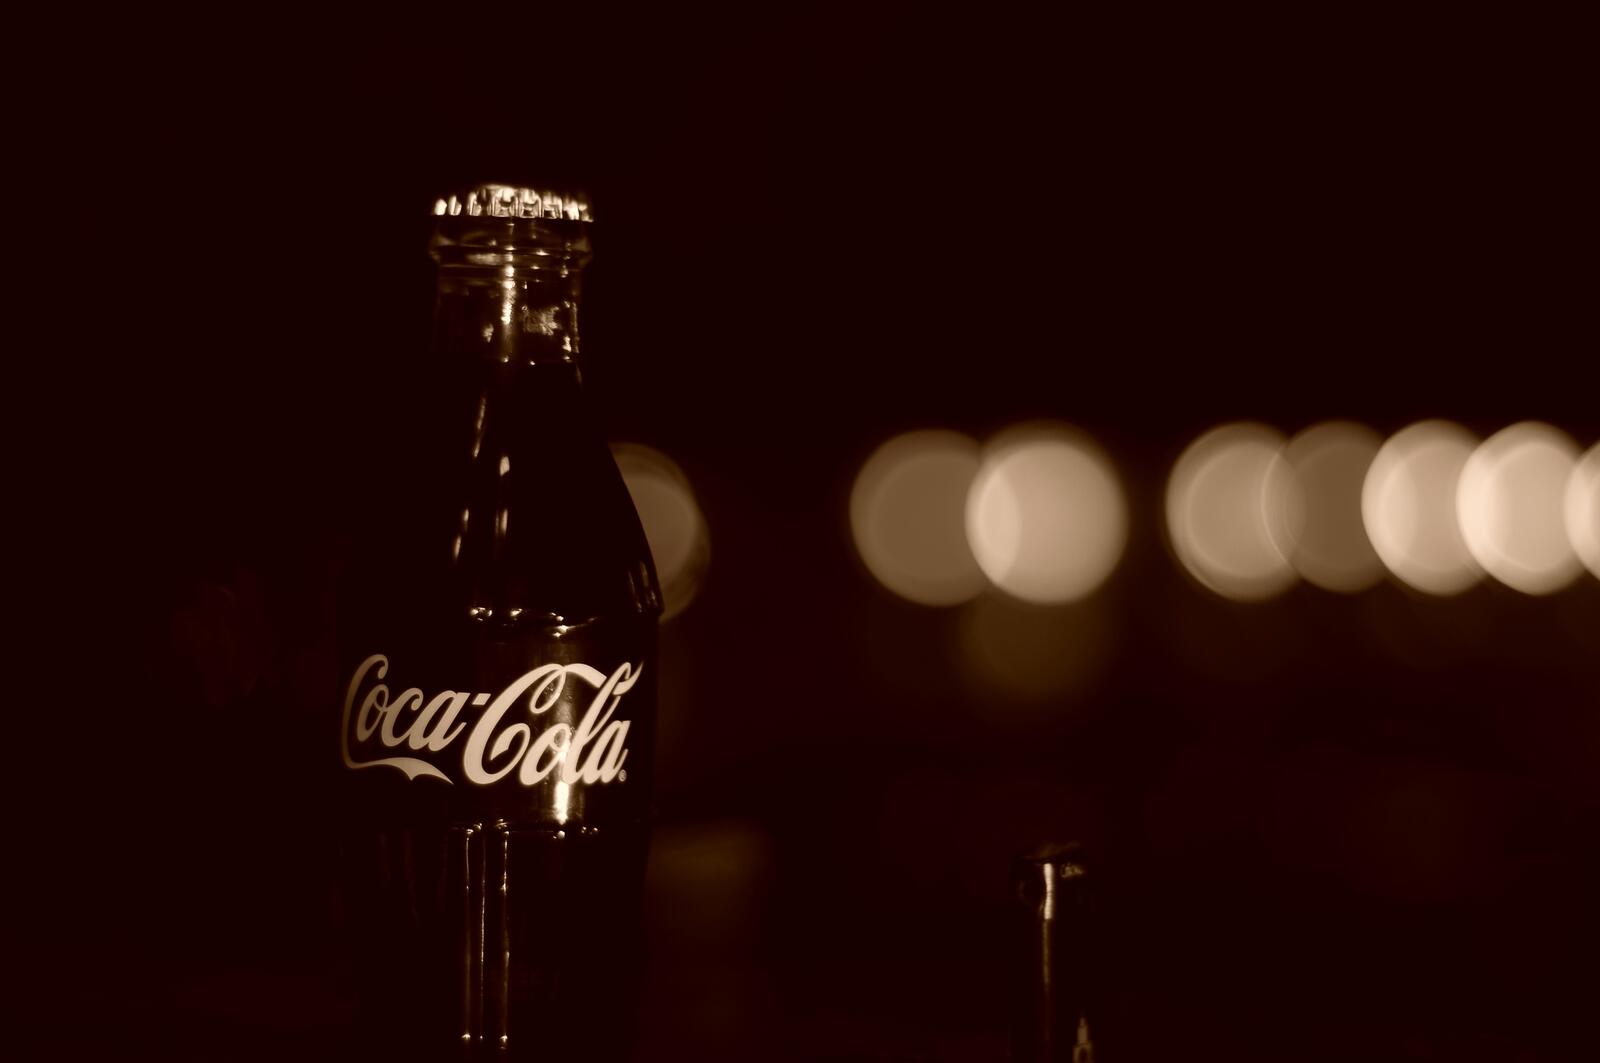 Free photo A bottle of Cocf-Cola